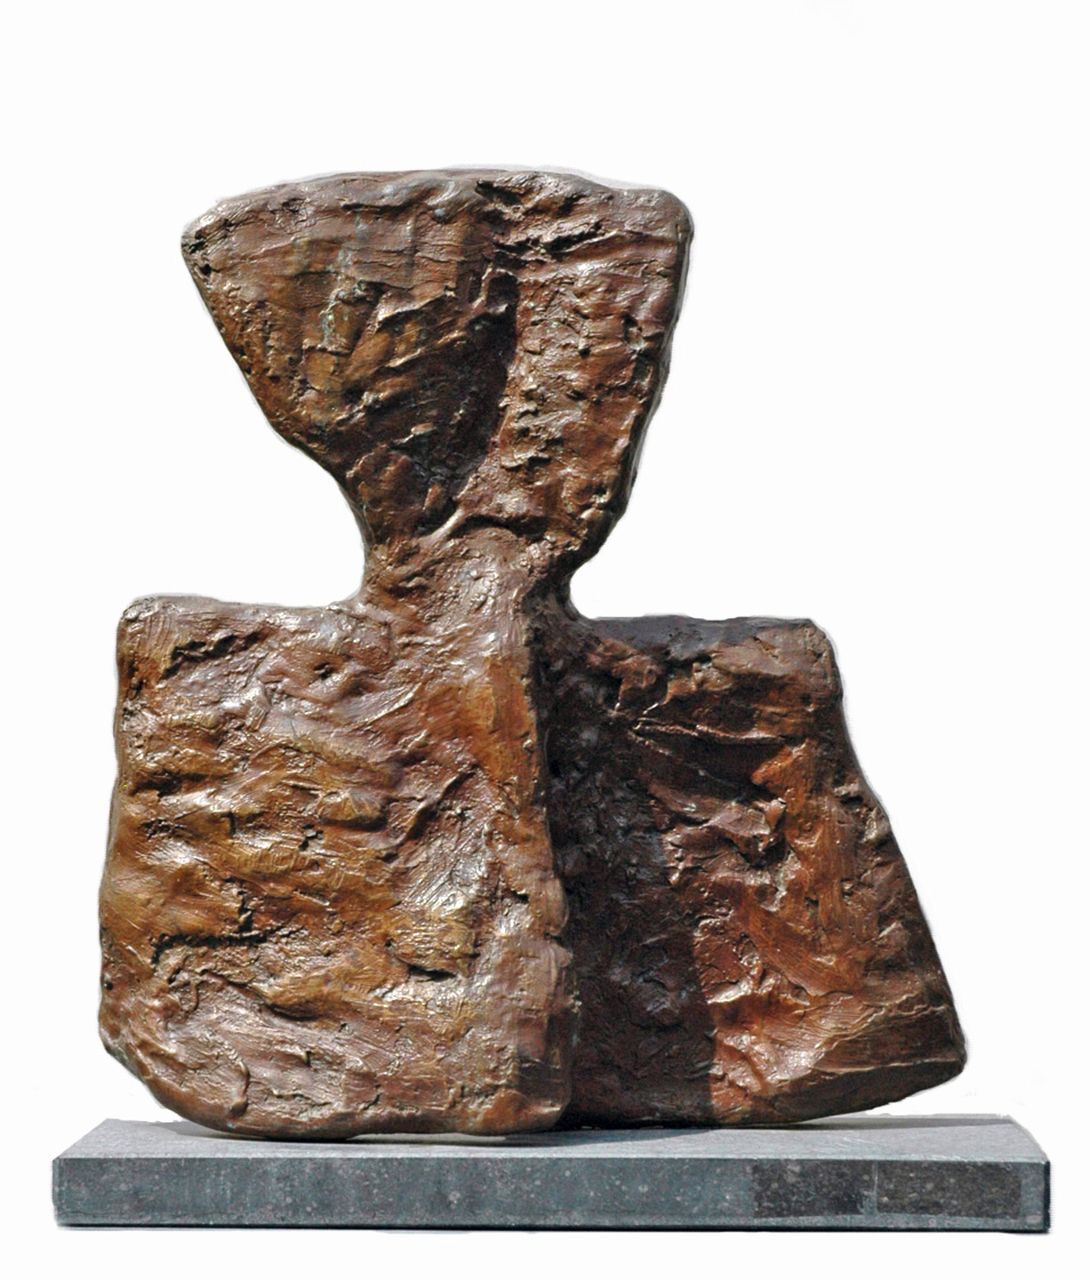 LeRoy A.  | Antoinette LeRoy, Figure in the wind, Bronze 38,0 x 32,0 cm, signed with initials on lower side.